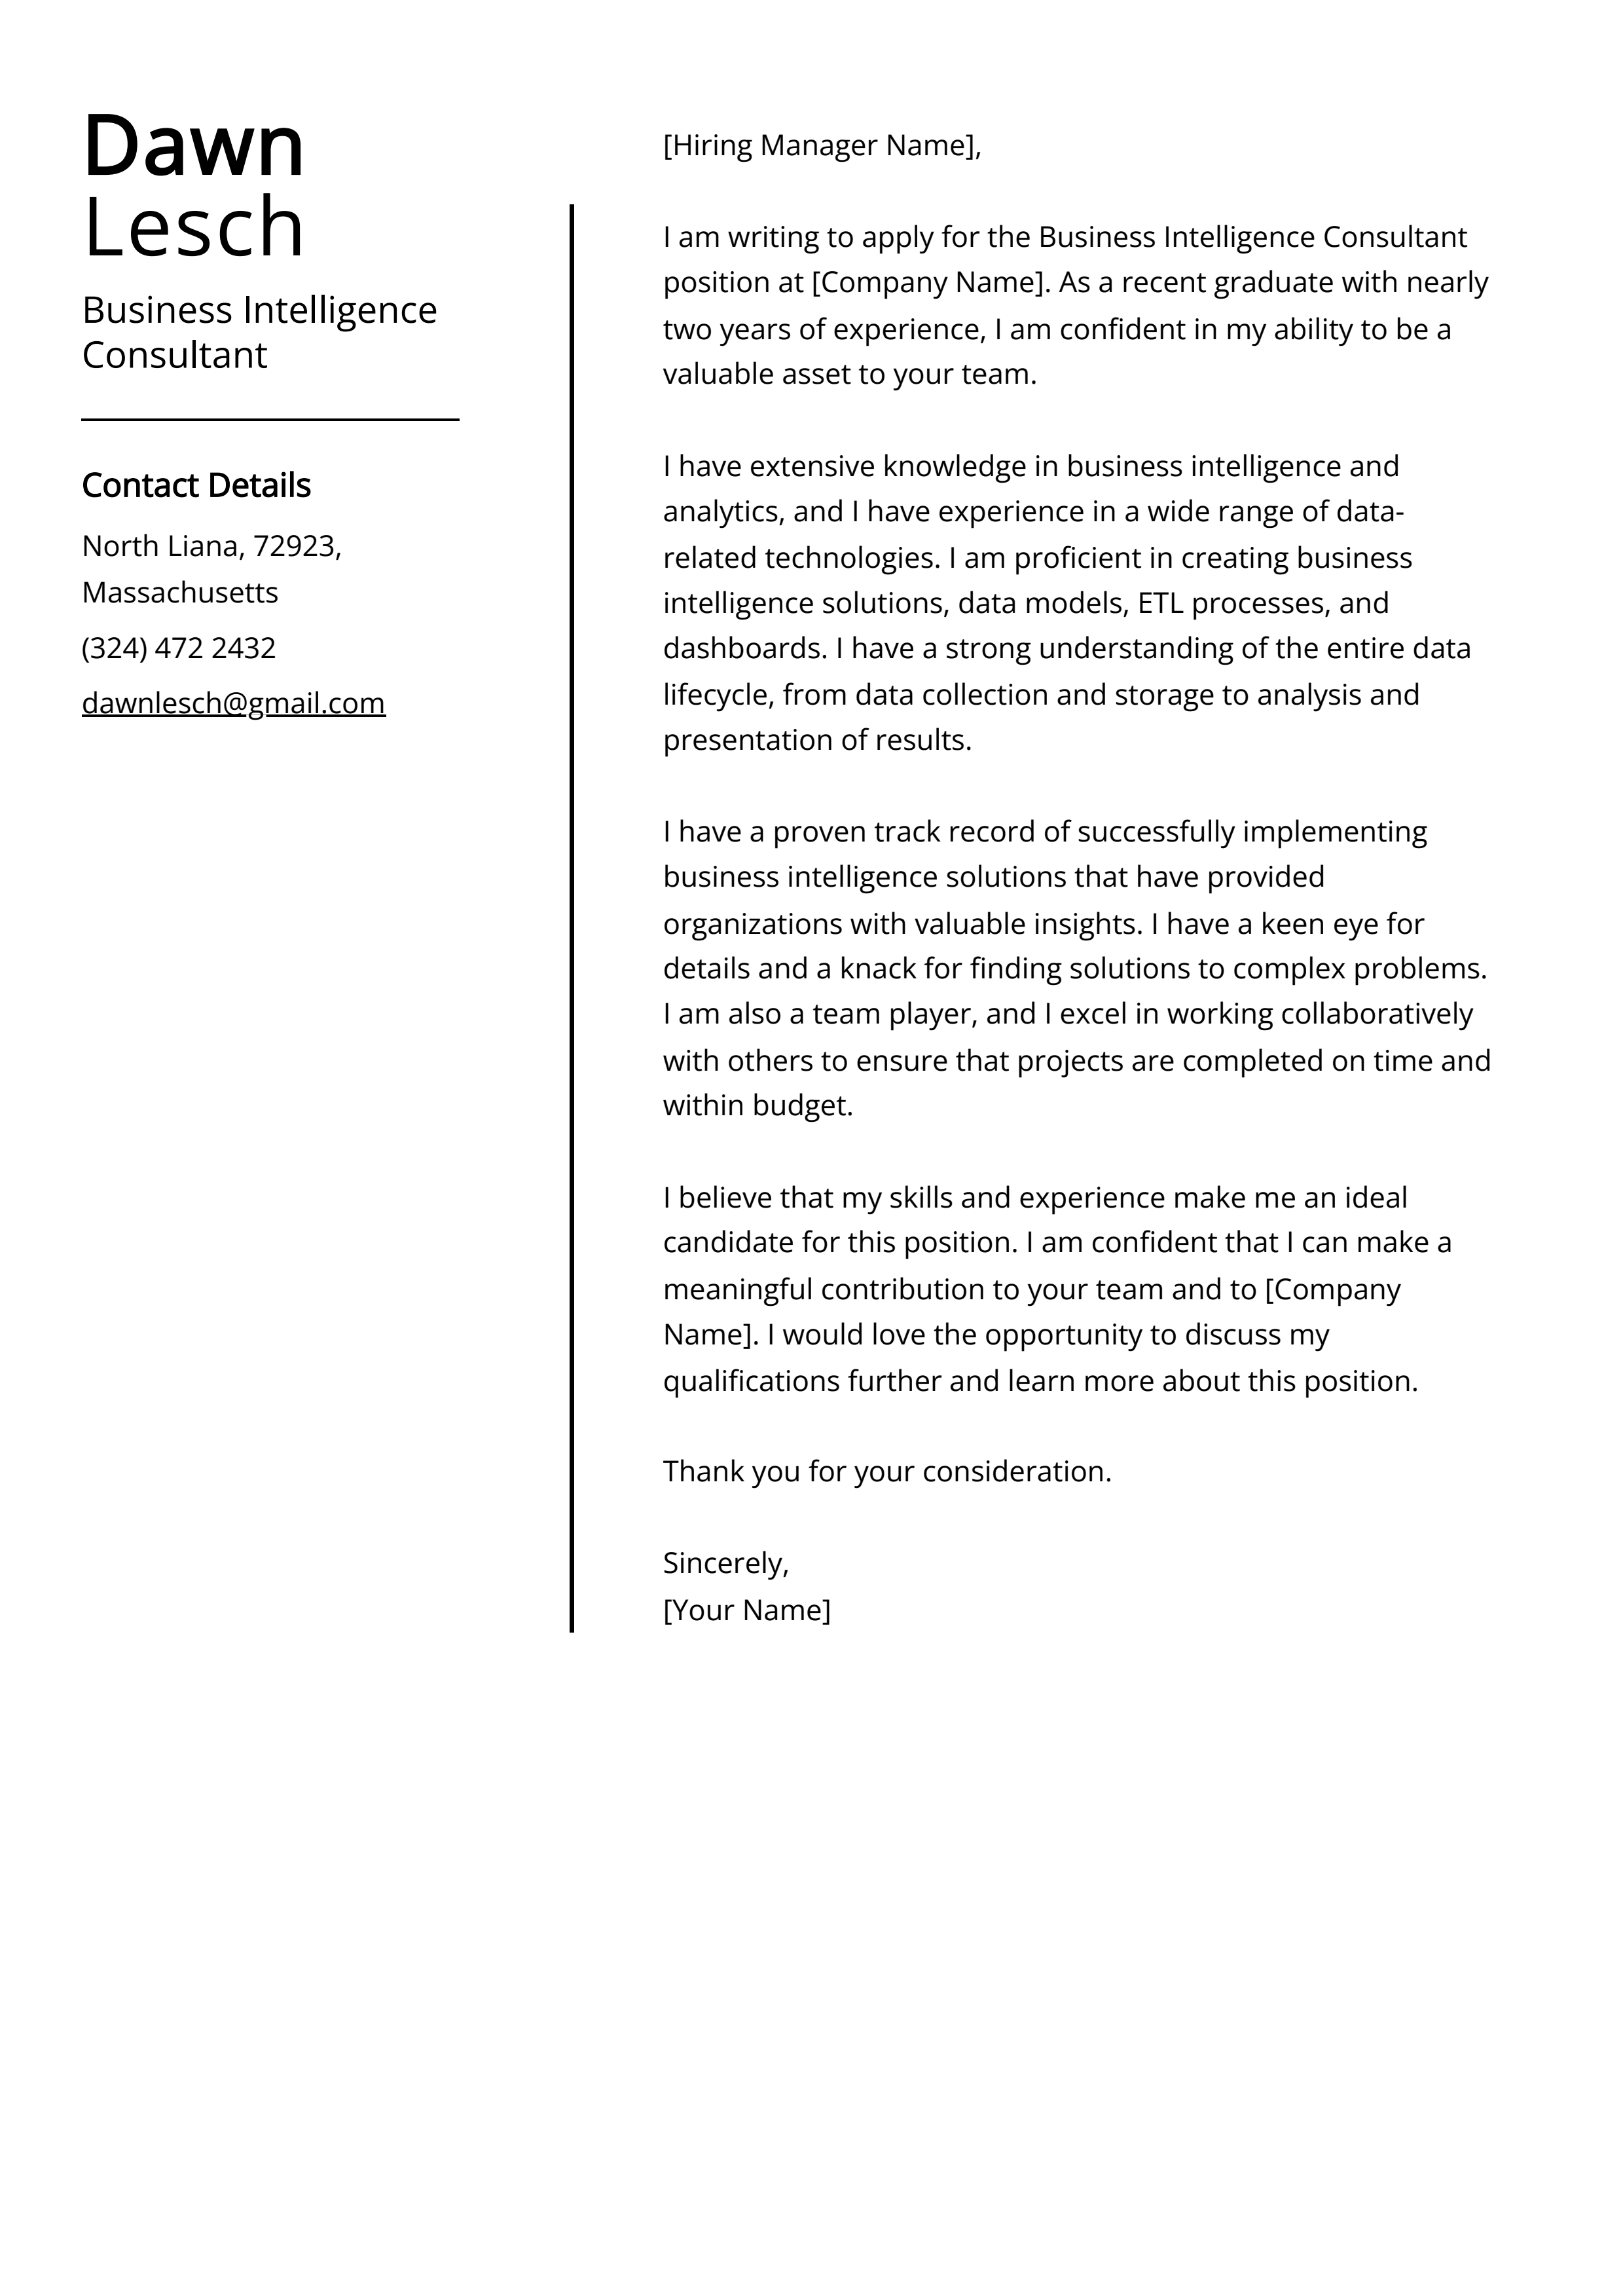 Business Intelligence Consultant Cover Letter Example